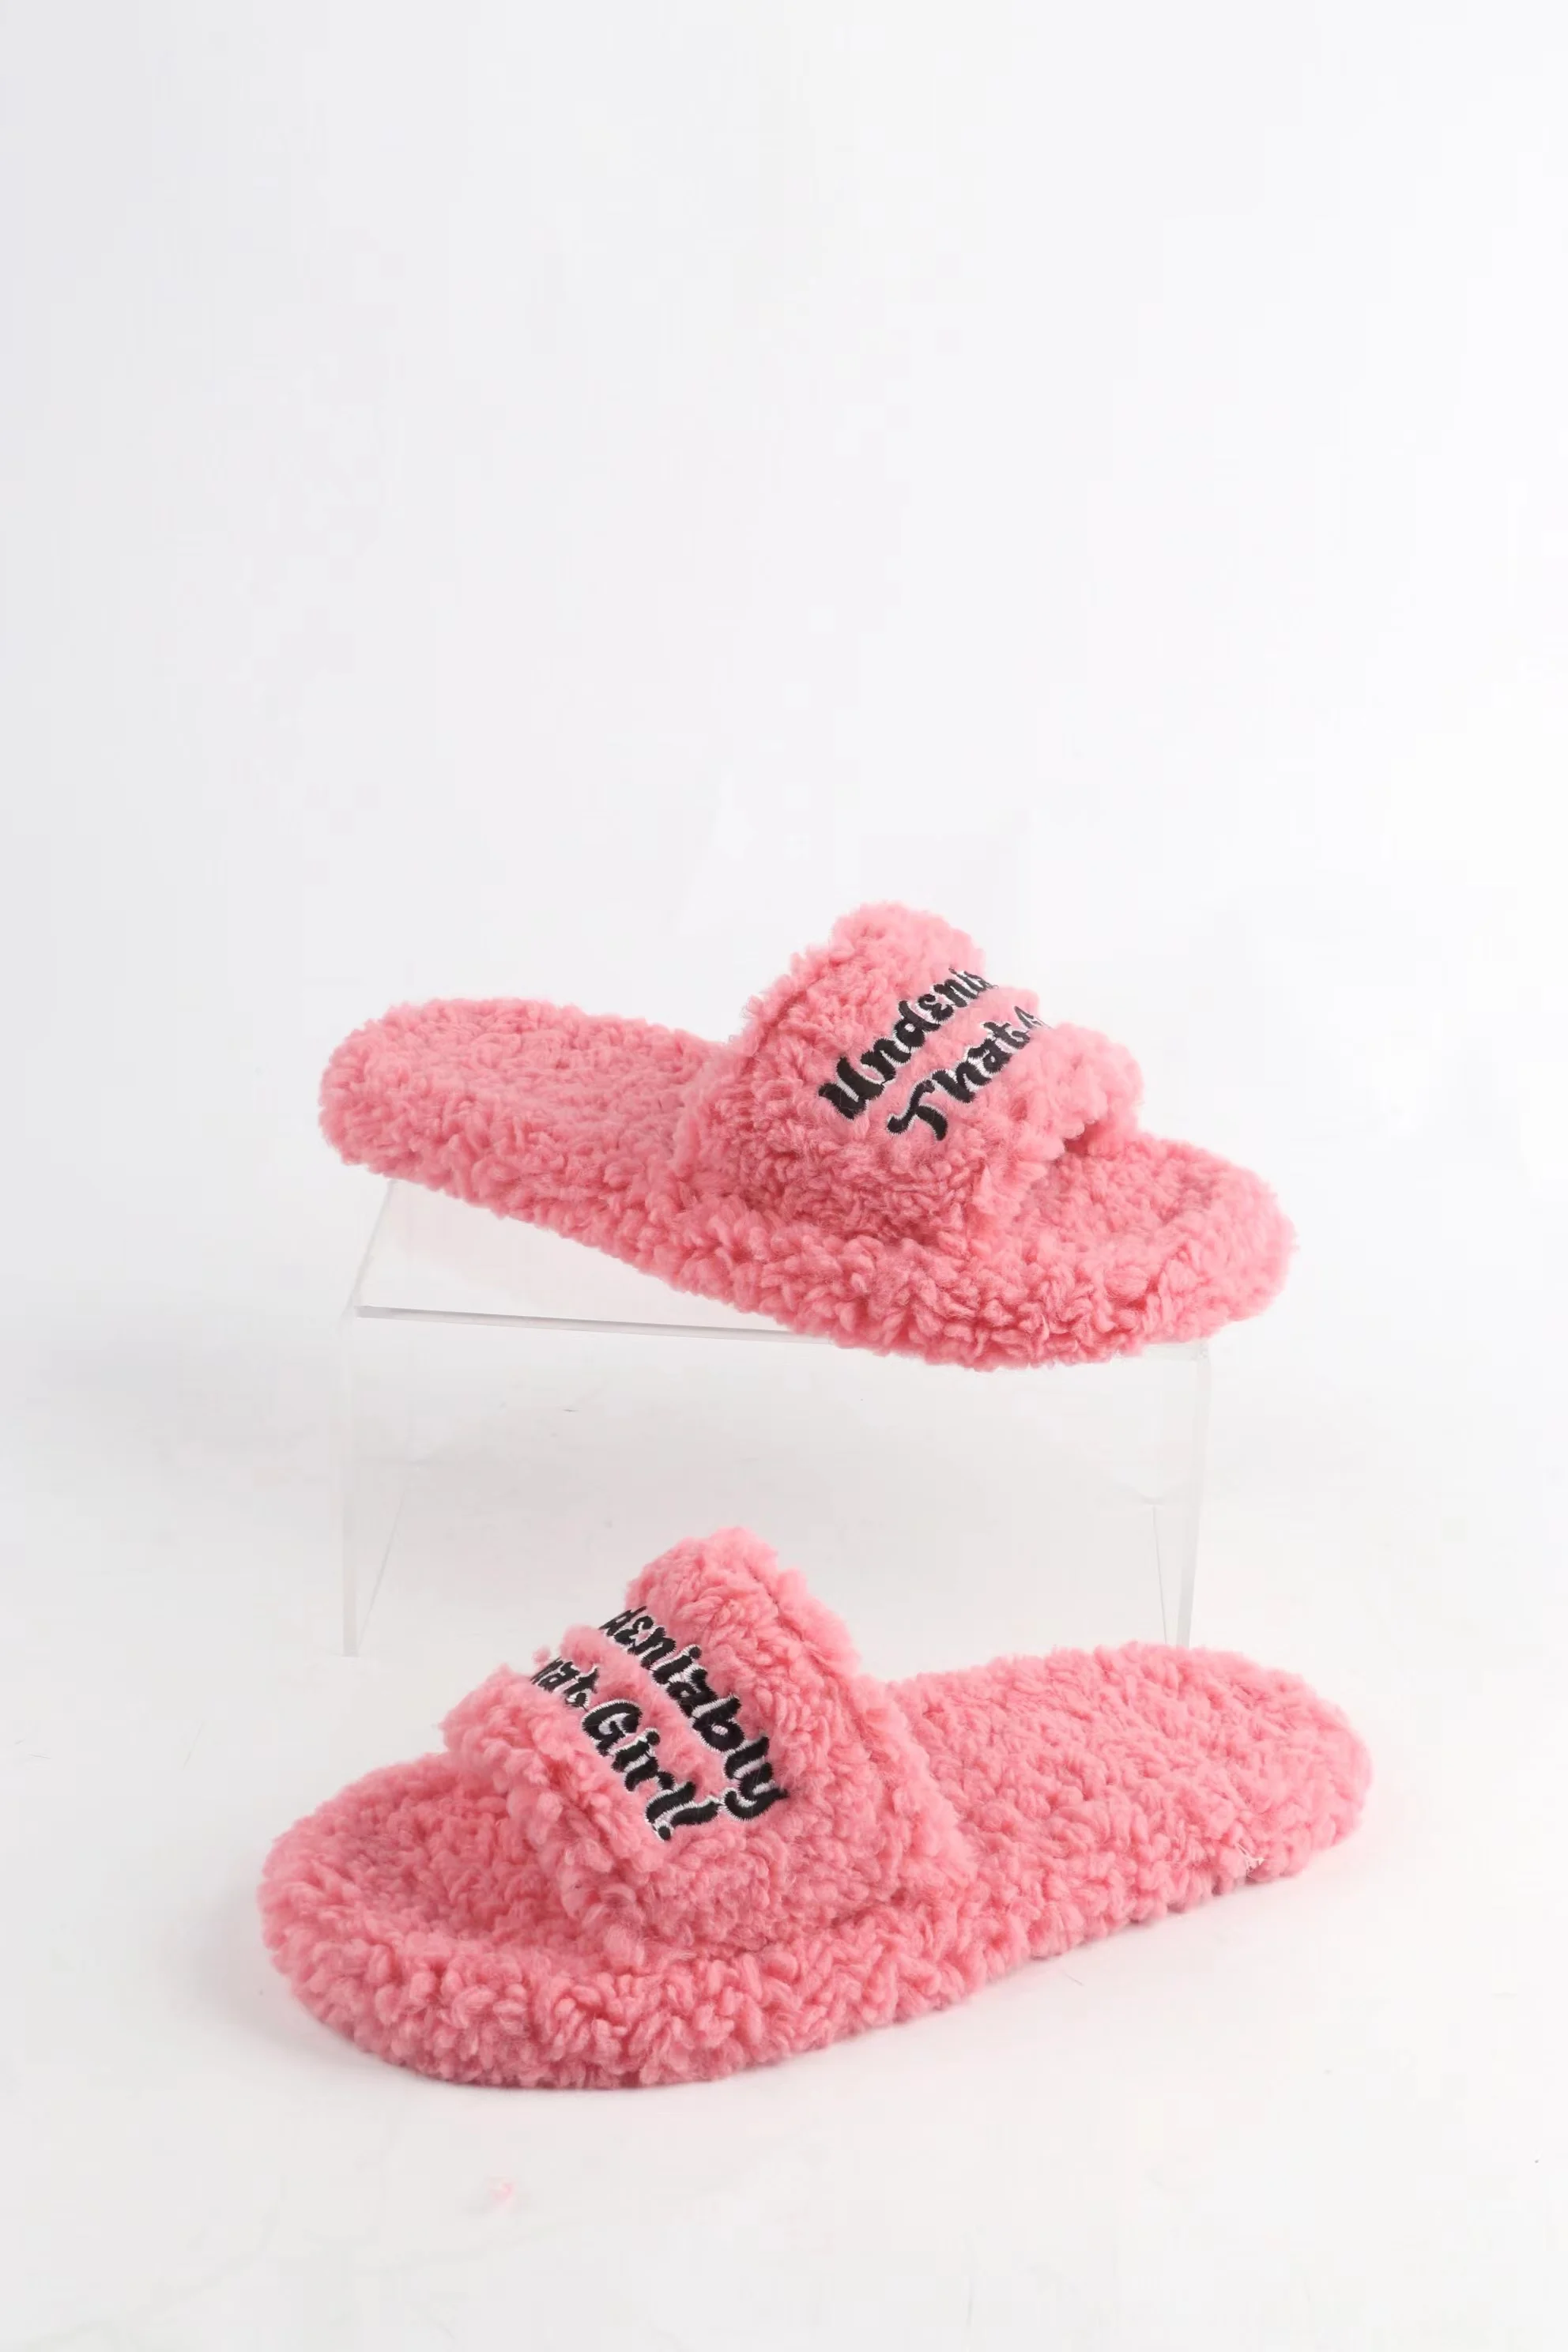 High Quality Women's Slippers Faux Fur Slipper Customized Fashion Soft ...